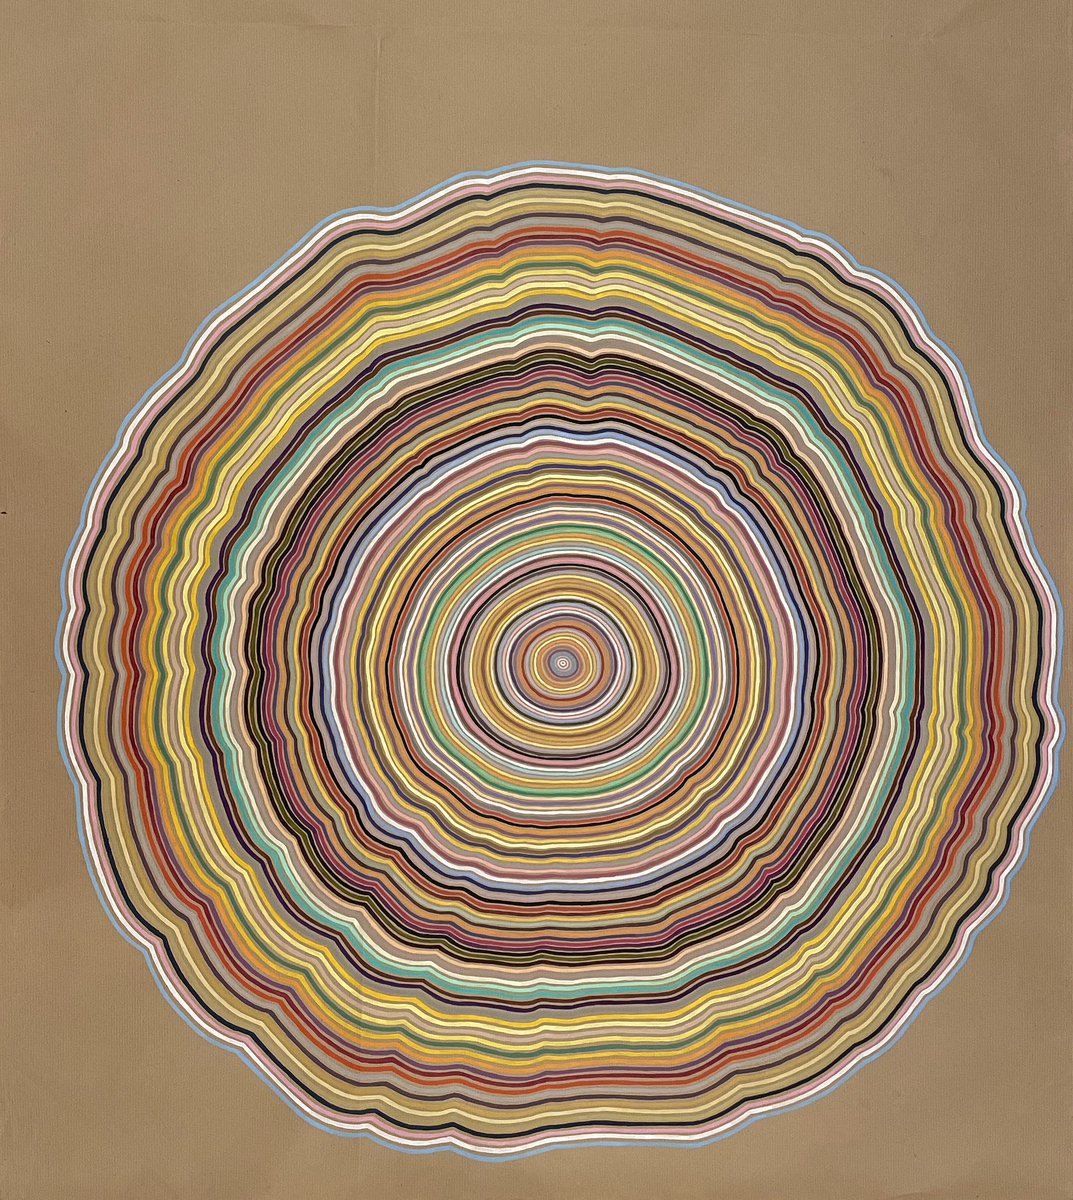 Untitled no.2 Acrylic on brown paper, 97x90cm Experimenting with concentric circles.